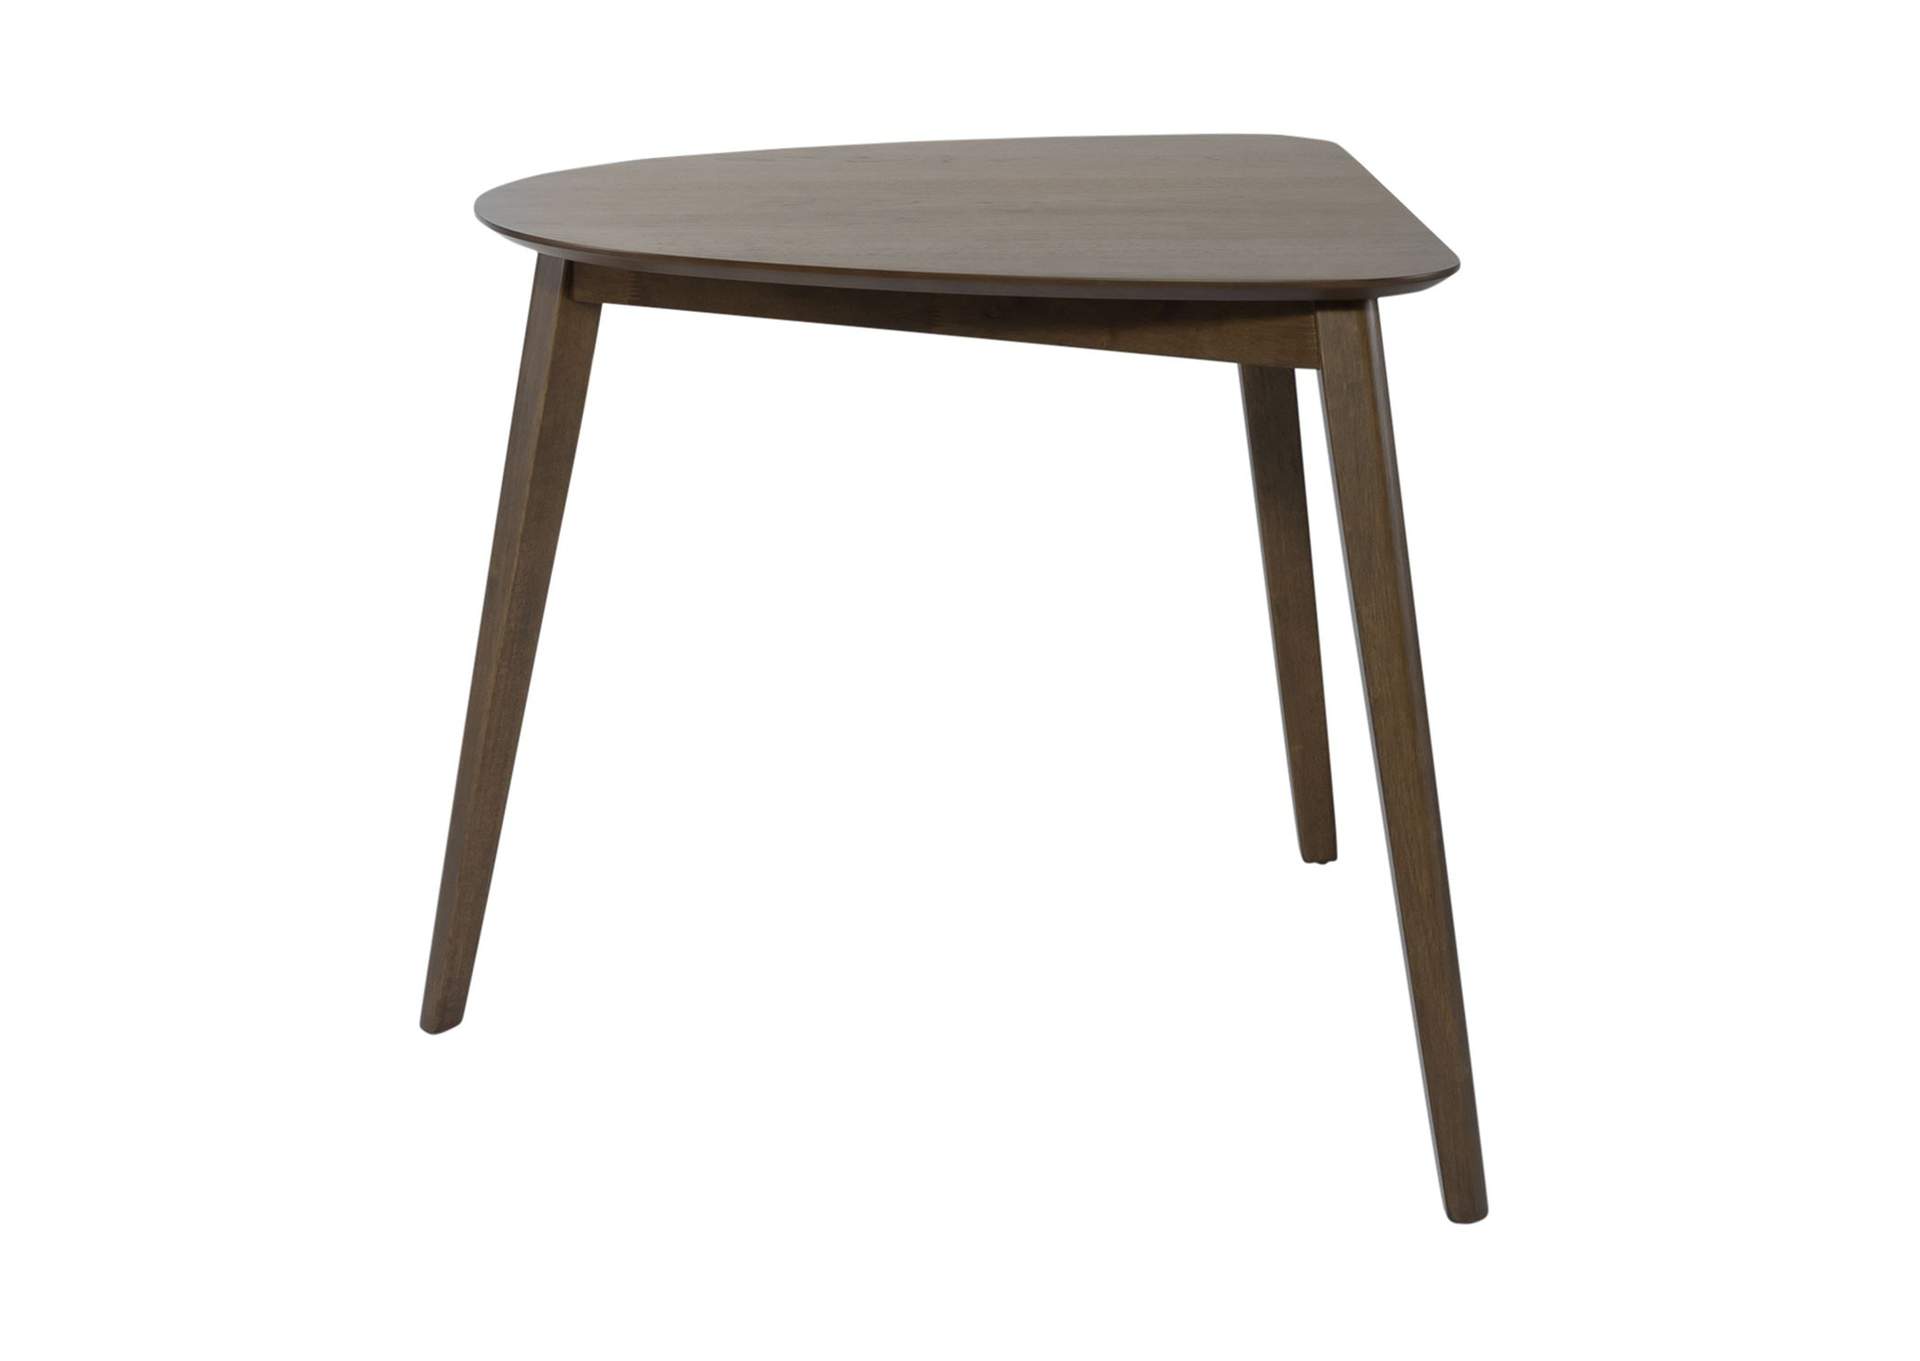 Space Savers Triangle Table,Liberty